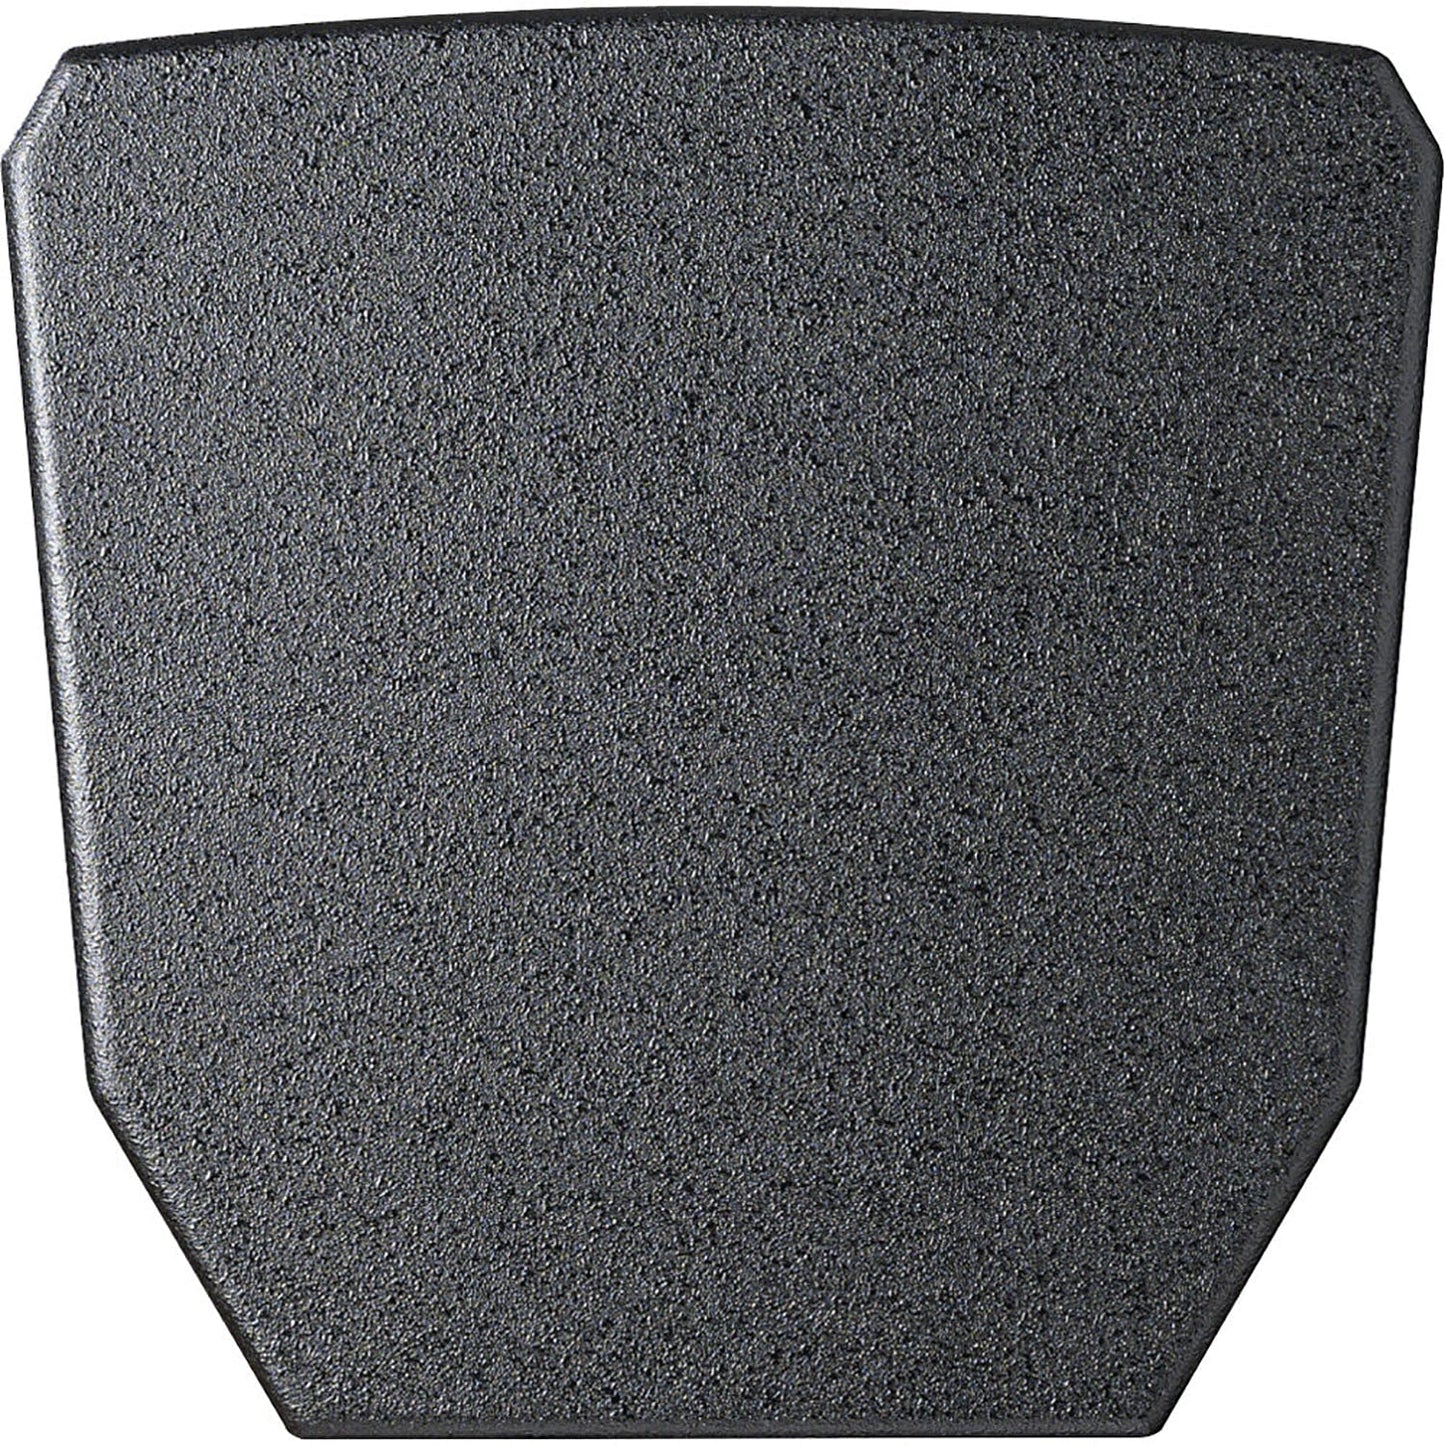 HK Audio Linear 7 115 FA Active Full-Range 2000W 15" Speaker - PSSL ProSound and Stage Lighting